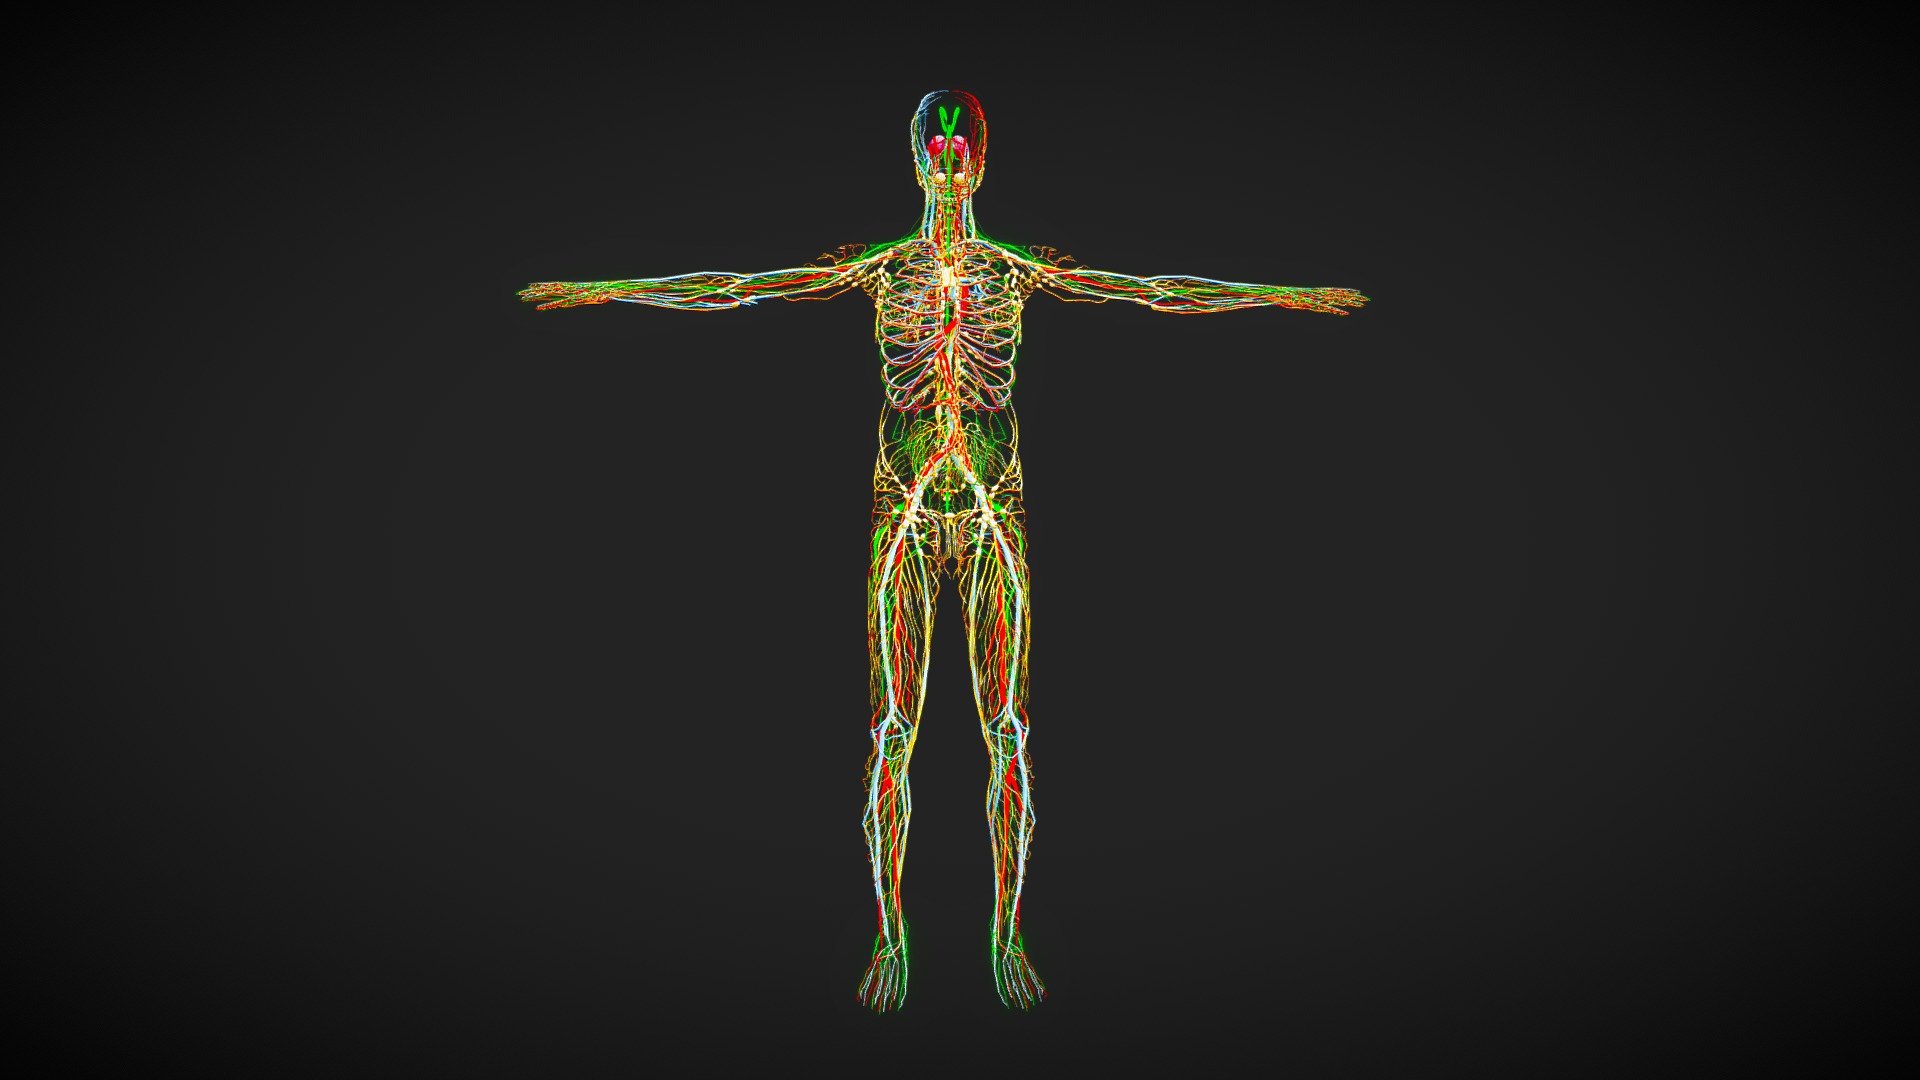 Male complete system, including lymphatic system, circulatory artery and nervous system. 
Clear grouping and accurate branch details,can be used for medical research and biological knowledge popularization activities.
 - Male Complete System - 3D model by 1225659838@qq.com (@Novaky) 3d model